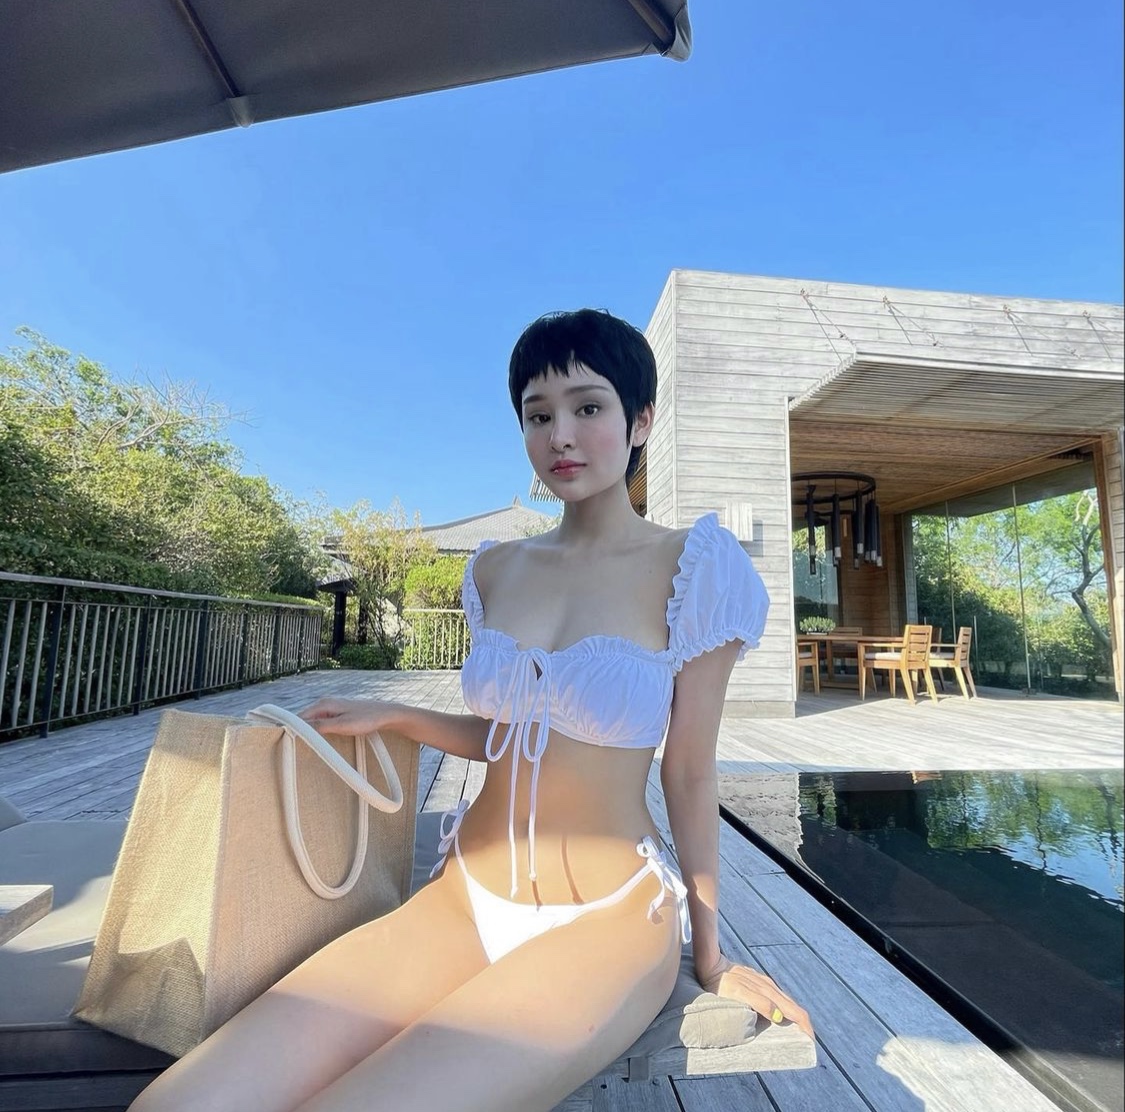 In those days Hien Ho was naive, now she's revealing her bikini body to show off her exposed body: All models are cheap but crazy beautiful!  - Photo 3.